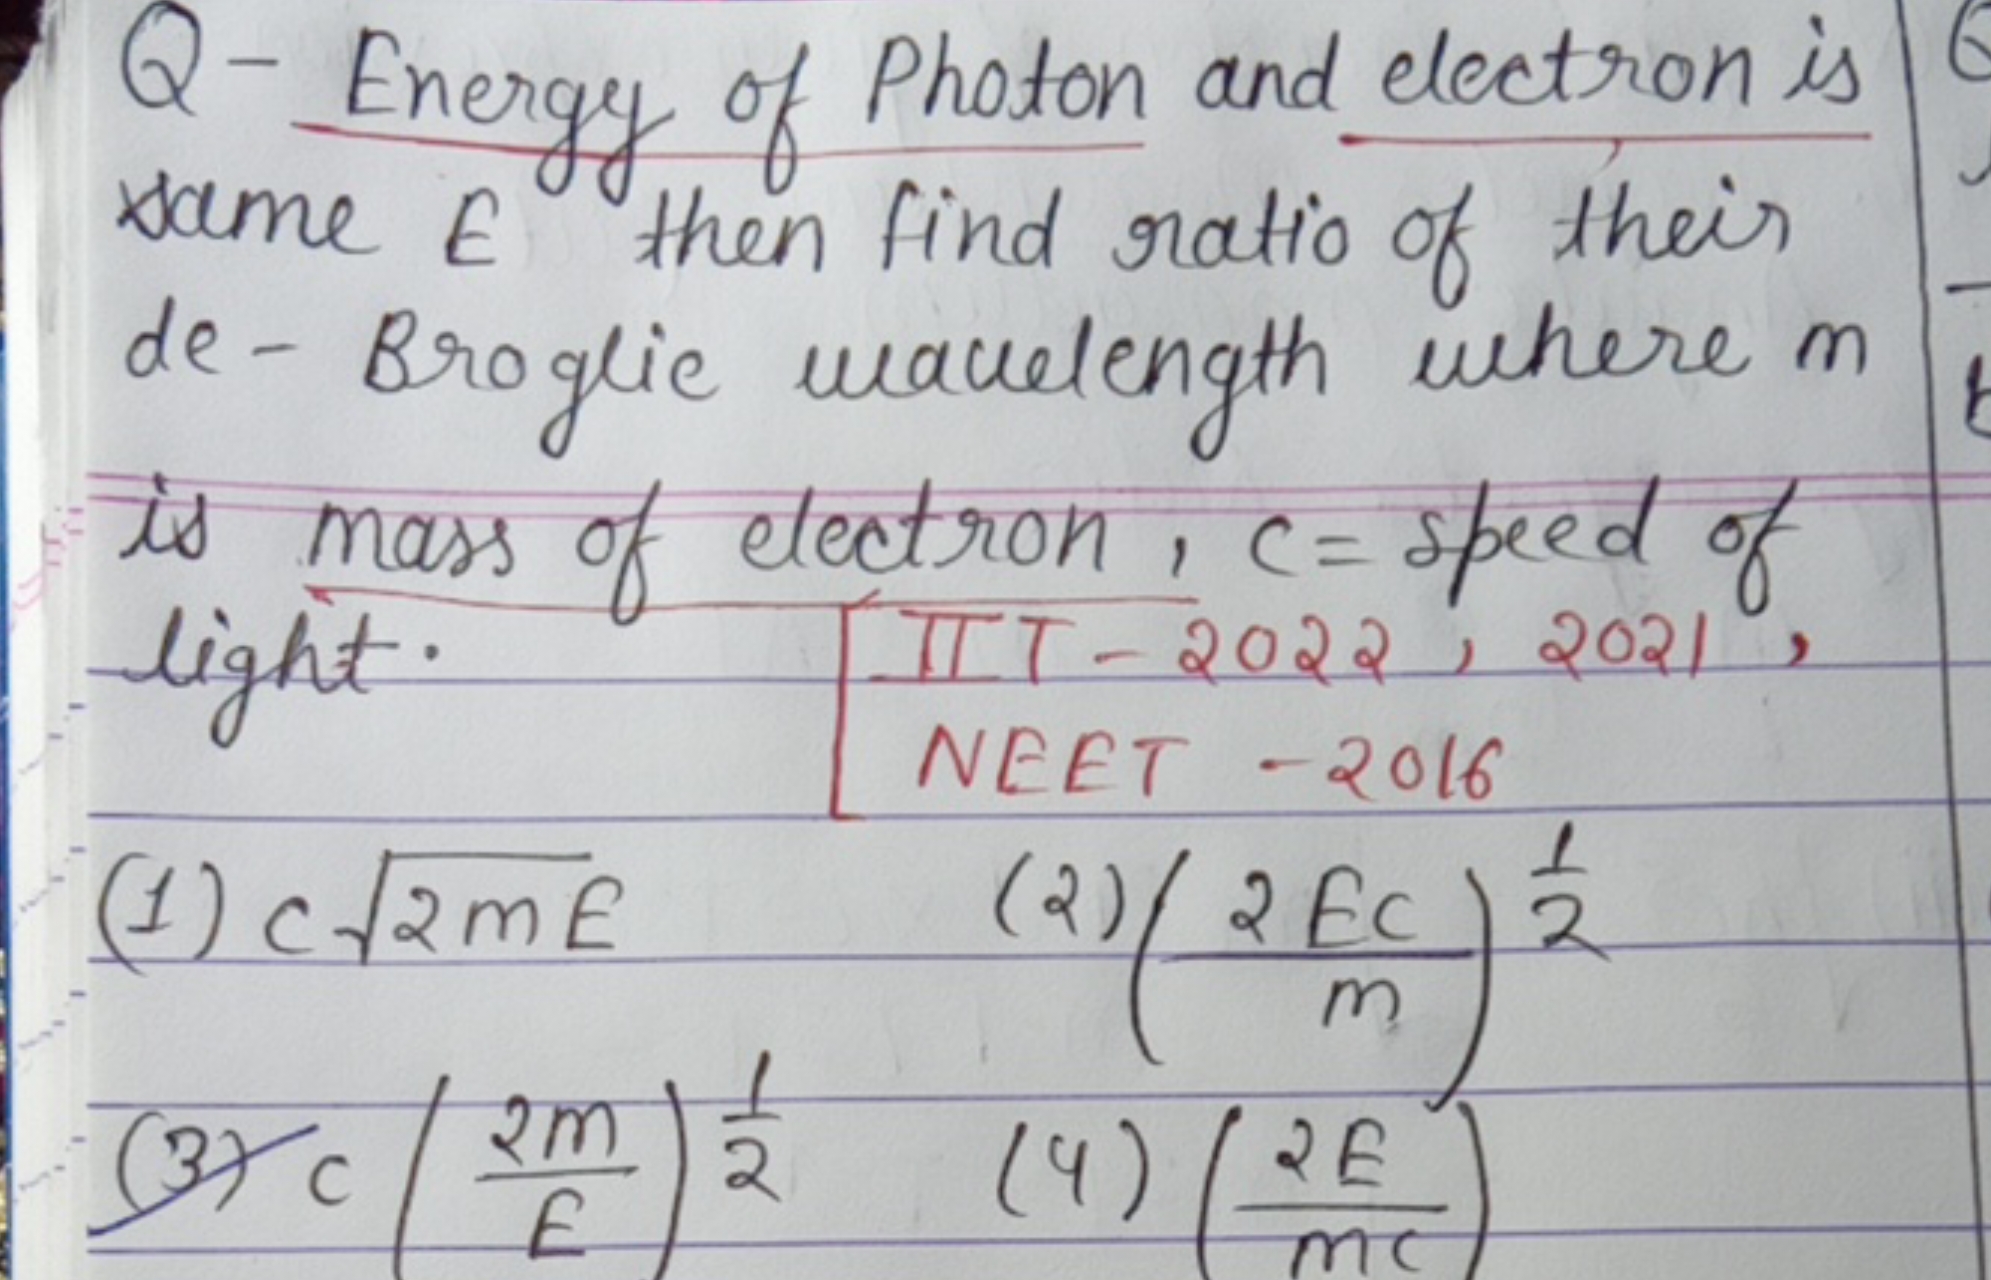 Q - Energy of Photon and electron is same E then find ratio of their d